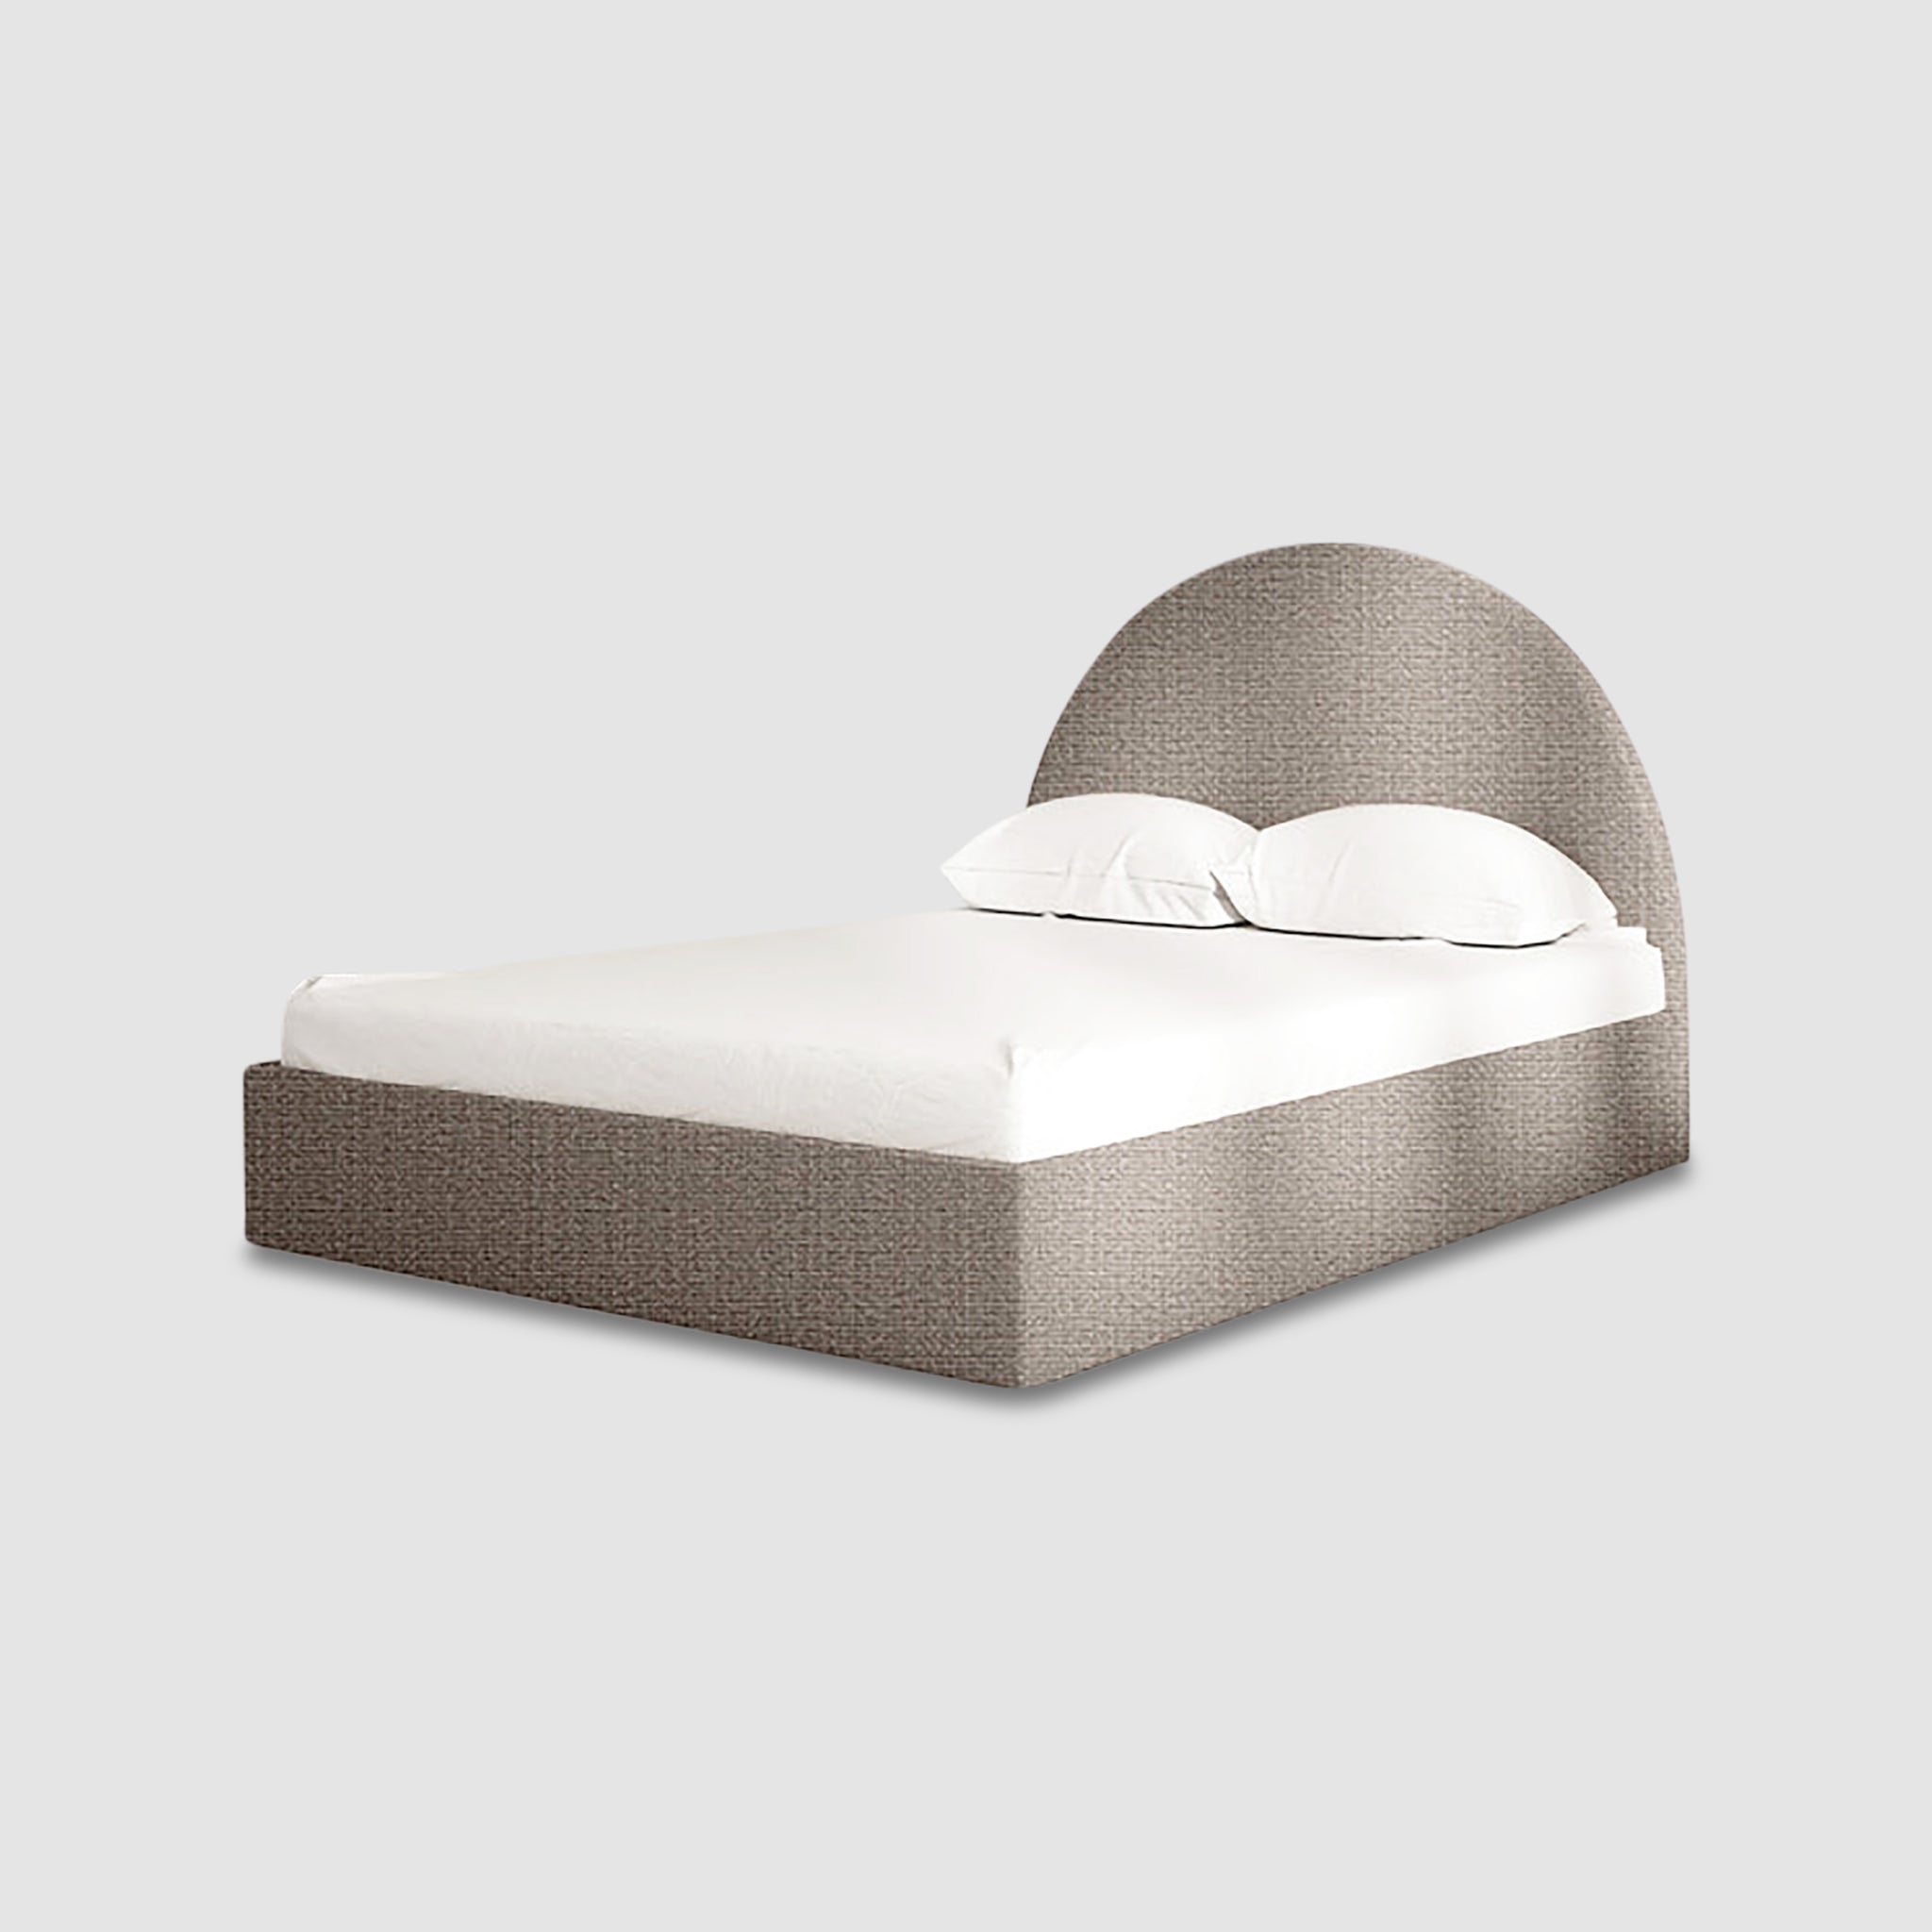 Plush, white upholstered bed with a curved headboard creates a stylish and space-saving look for modern bedrooms. The Archie Bed by Klettkic is ideal for master or guest rooms.